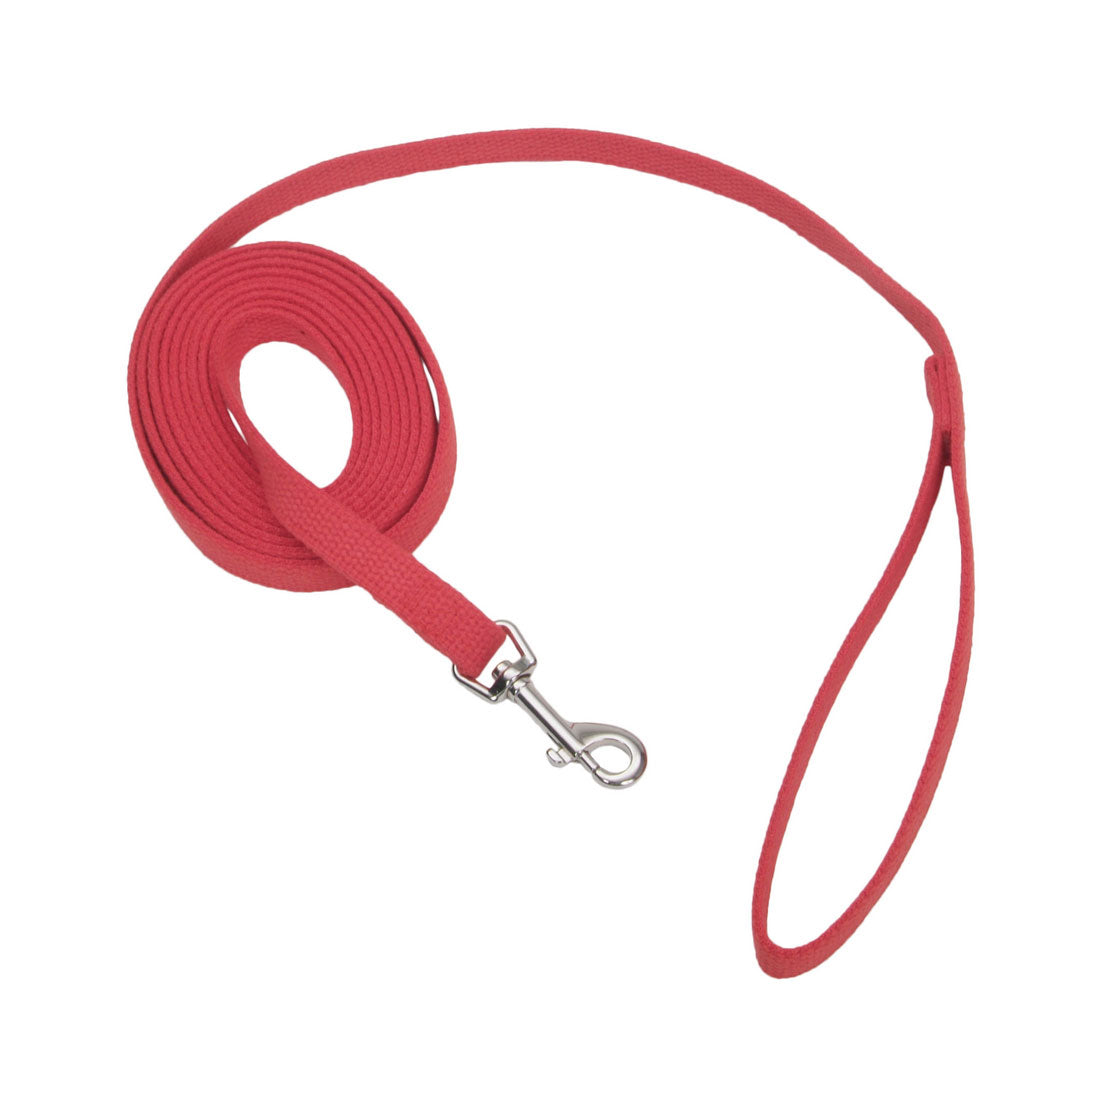 Coastal Pet Products Train Right Cotton Web Training Leash 20ft Red 5/8″ x 20ft – 00520-RED20